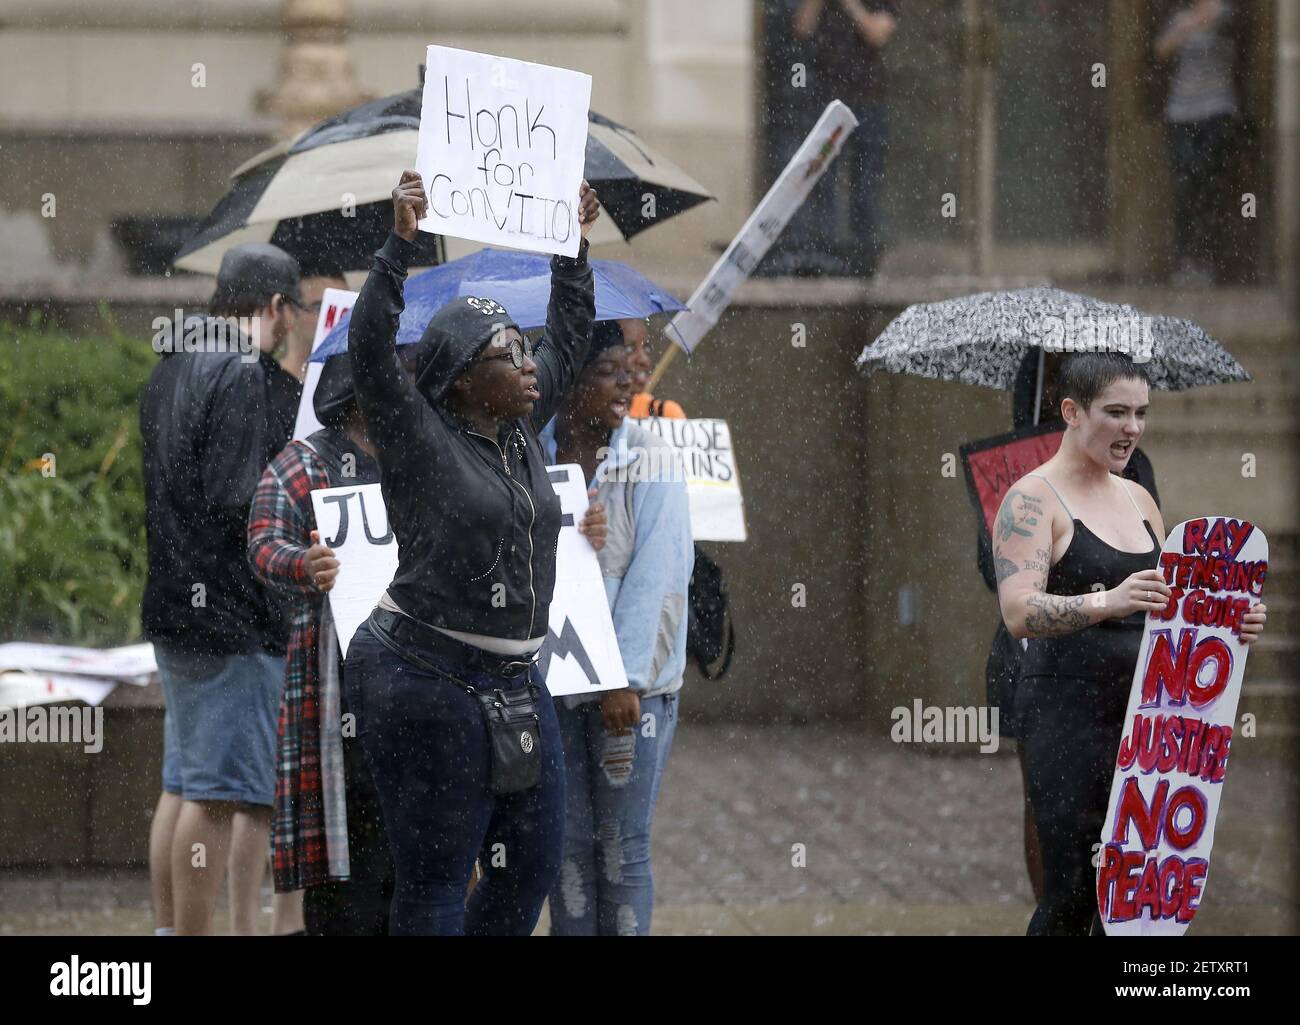 June 23, 2017; Cincinnati, OH, USA; Protesters gather at the courthouse steps as the jury deliberates in the murder trial of former University of Cincinnati police officer Ray Tensing outside the Hamilton County Courthouse in downtown Cincinnati. After more than 30 hours of deliberation without a verdict, judge Leslie Ghiz declared a mistrial. Mandatory credit: Sam Greene/The Enquirer via USA TODAY NETWROK *** Please Use Credit from Credit Field *** Stock Photo